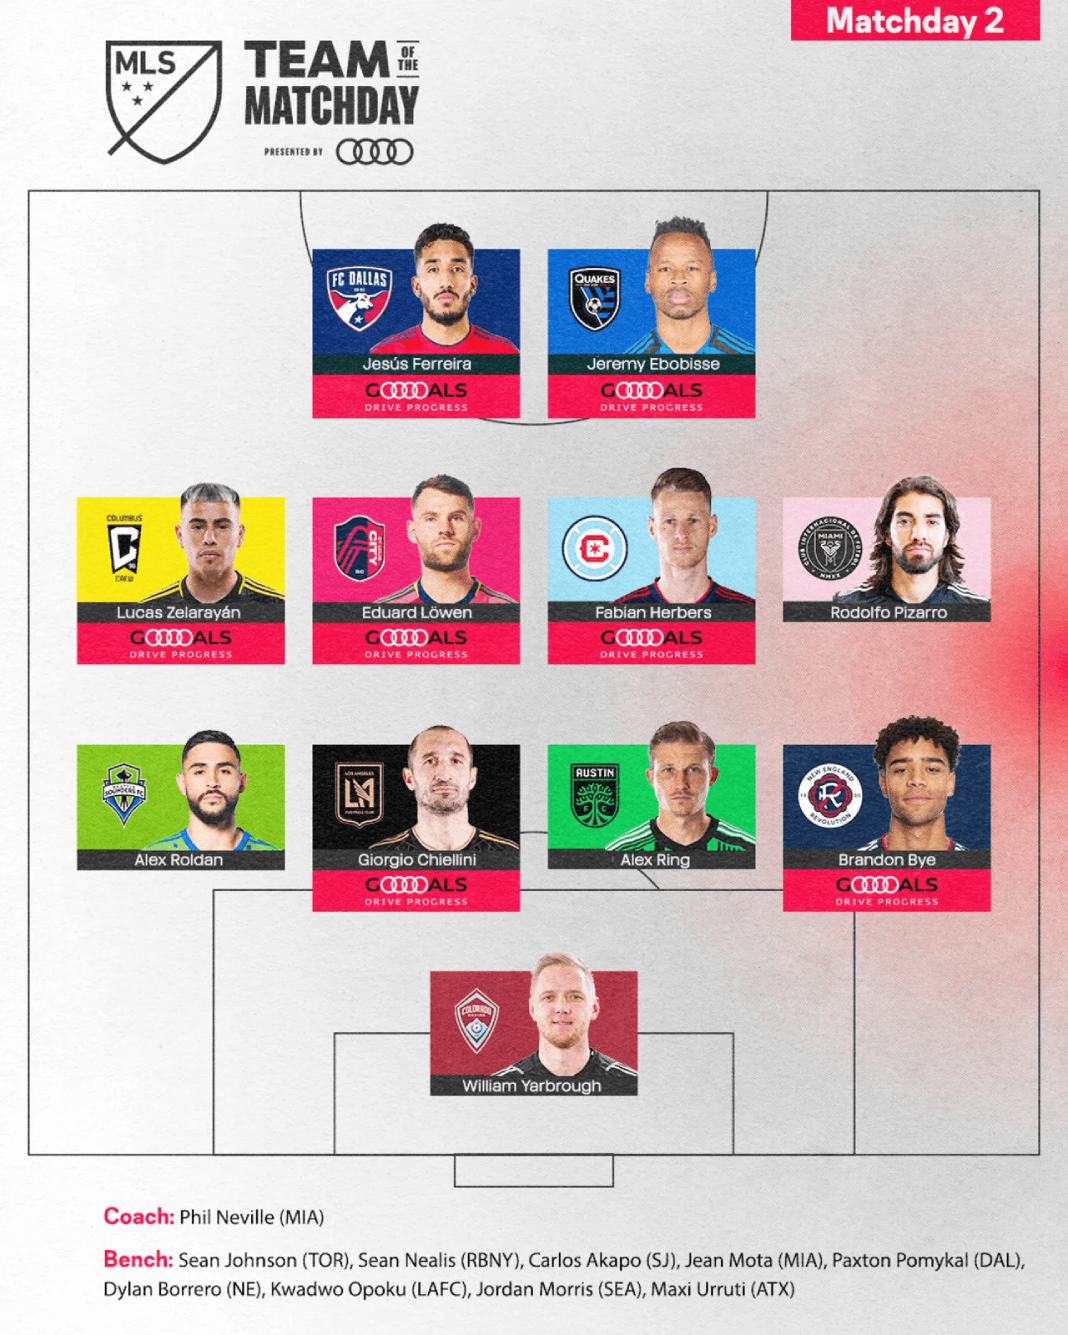 Team of the Matchday 2